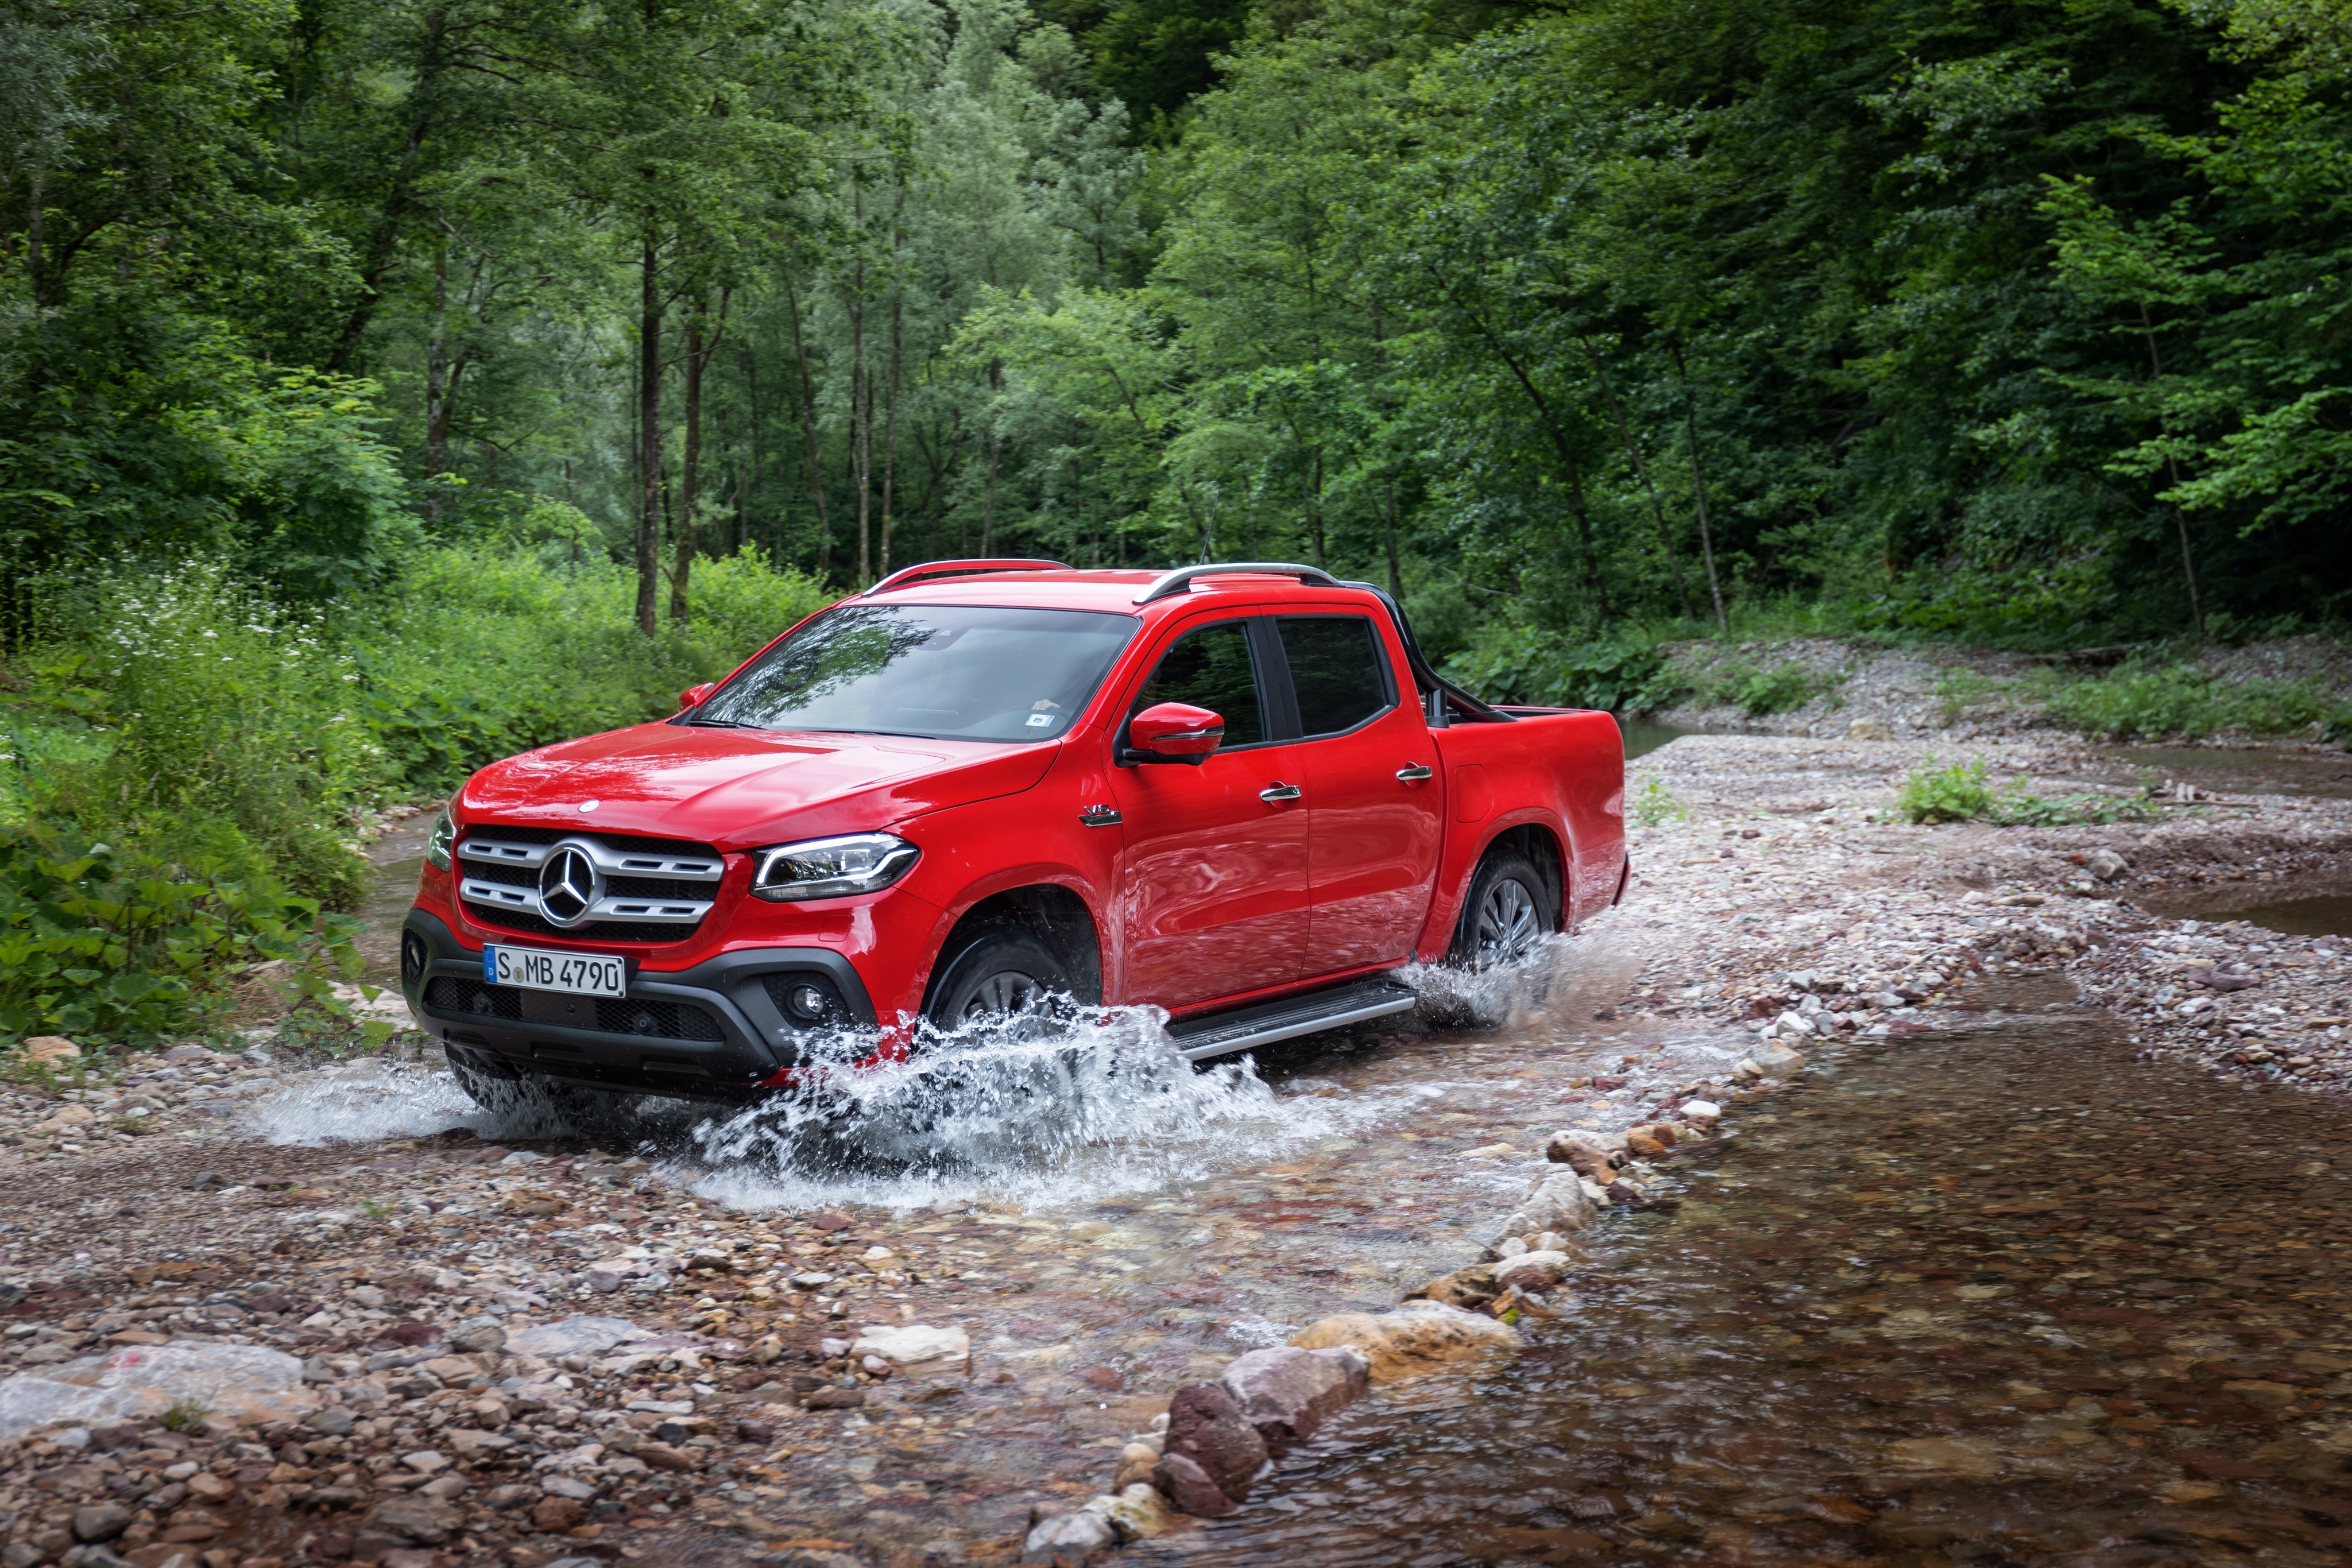 Download wallpapers Mercedes-Benz X-Class, 4k, 2018, new cars, pickup  trucks, new silver X-Class, SUV, German cars, Mercedes for desktop free.  Pictures for desk…